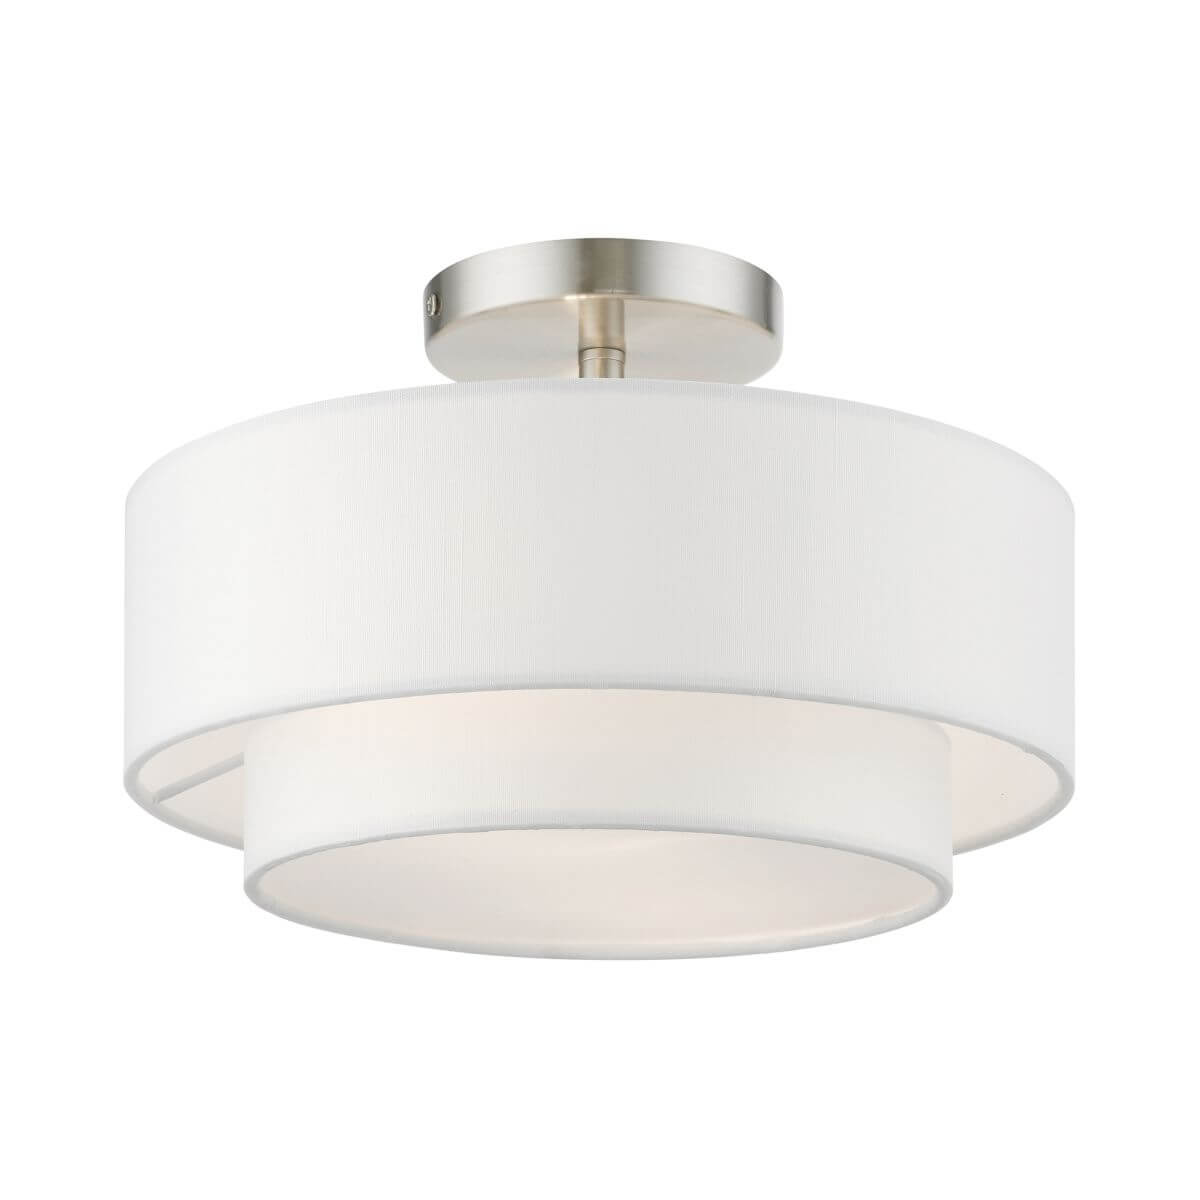 Livex 47151-91 Meridian 2 Light 12 inch Semi-Flush Mount in Brushed Nickel with Hand Crafted Off-white Hardback Fabric Shade - White Fabric Inside